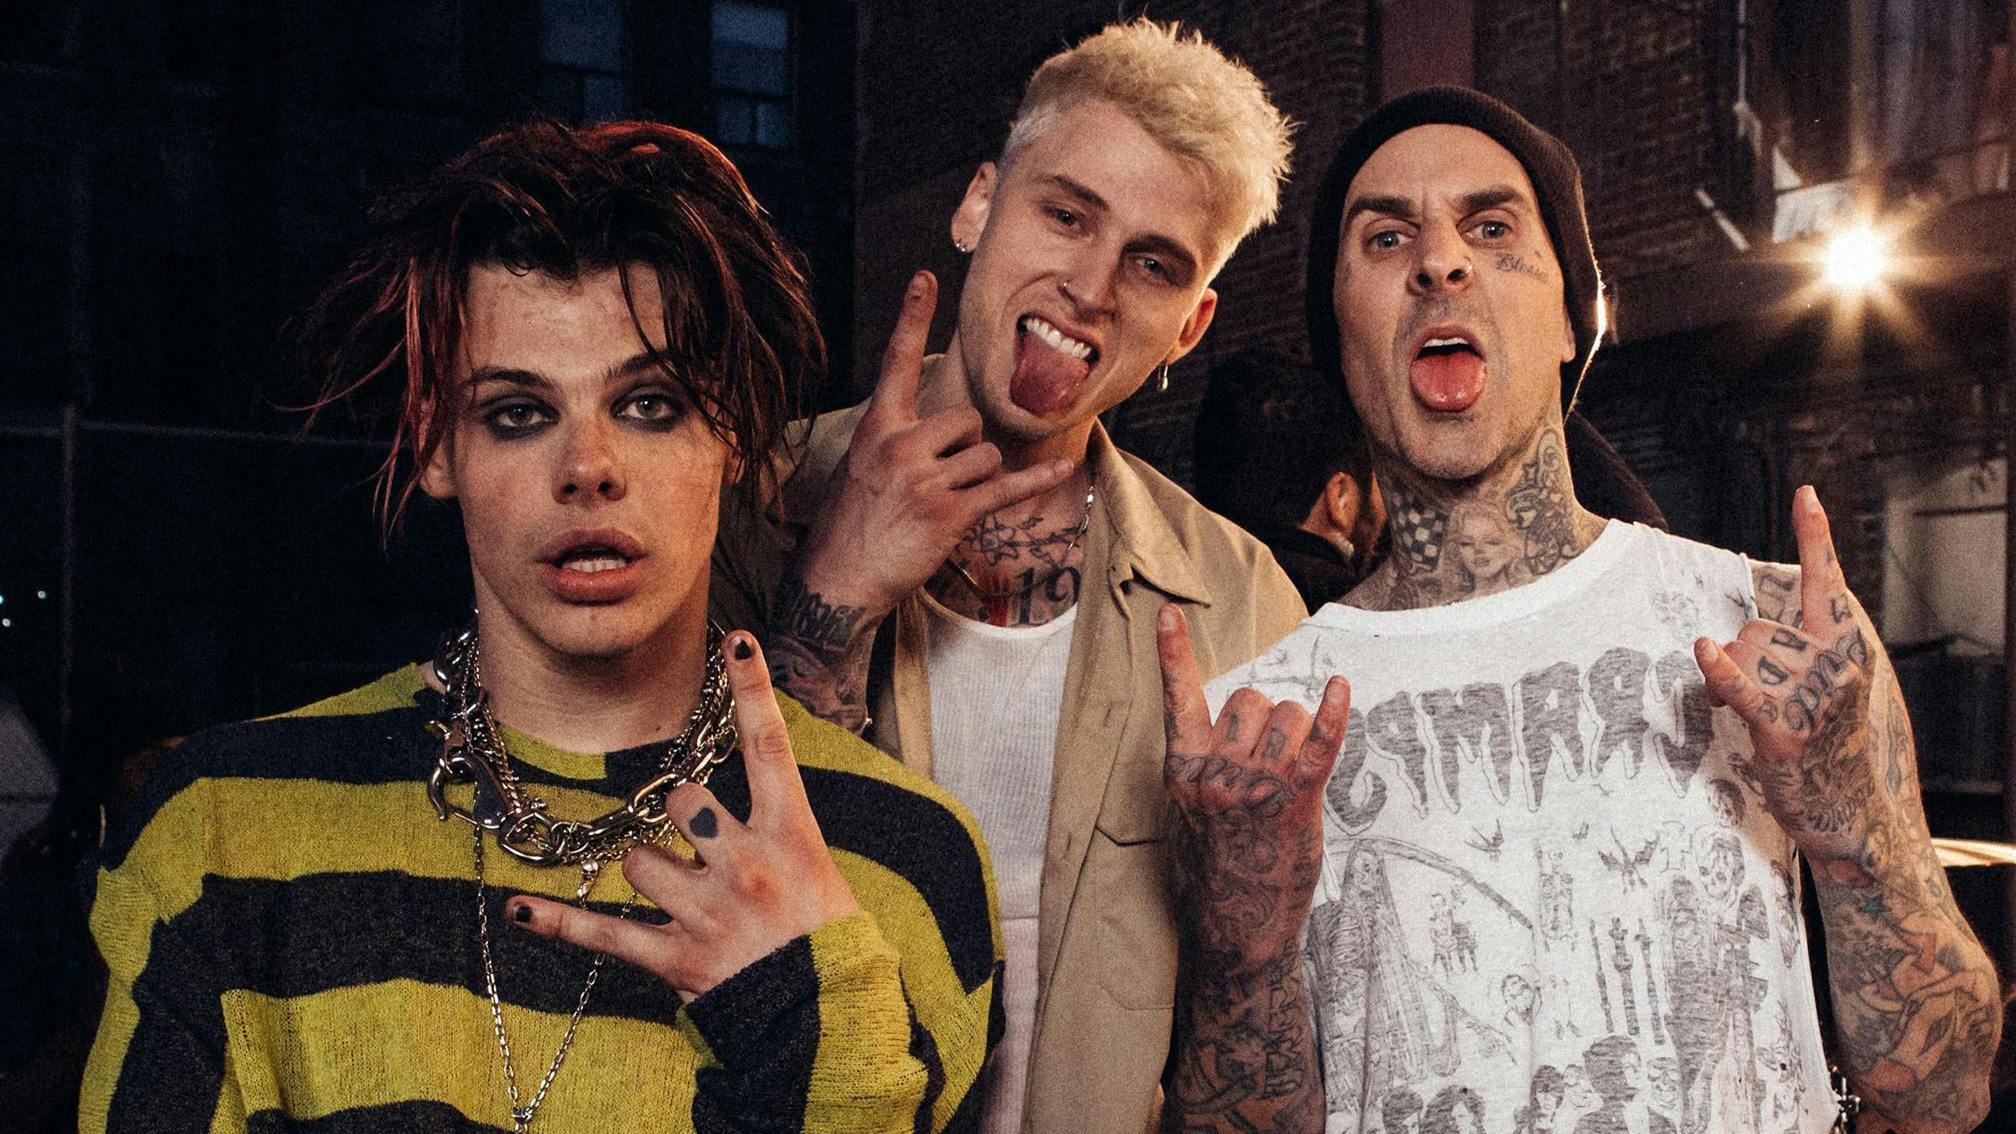 Hear MGK and YUNGBLUD's I Think I'm OKAY in the style of blink-182, State Champs and more